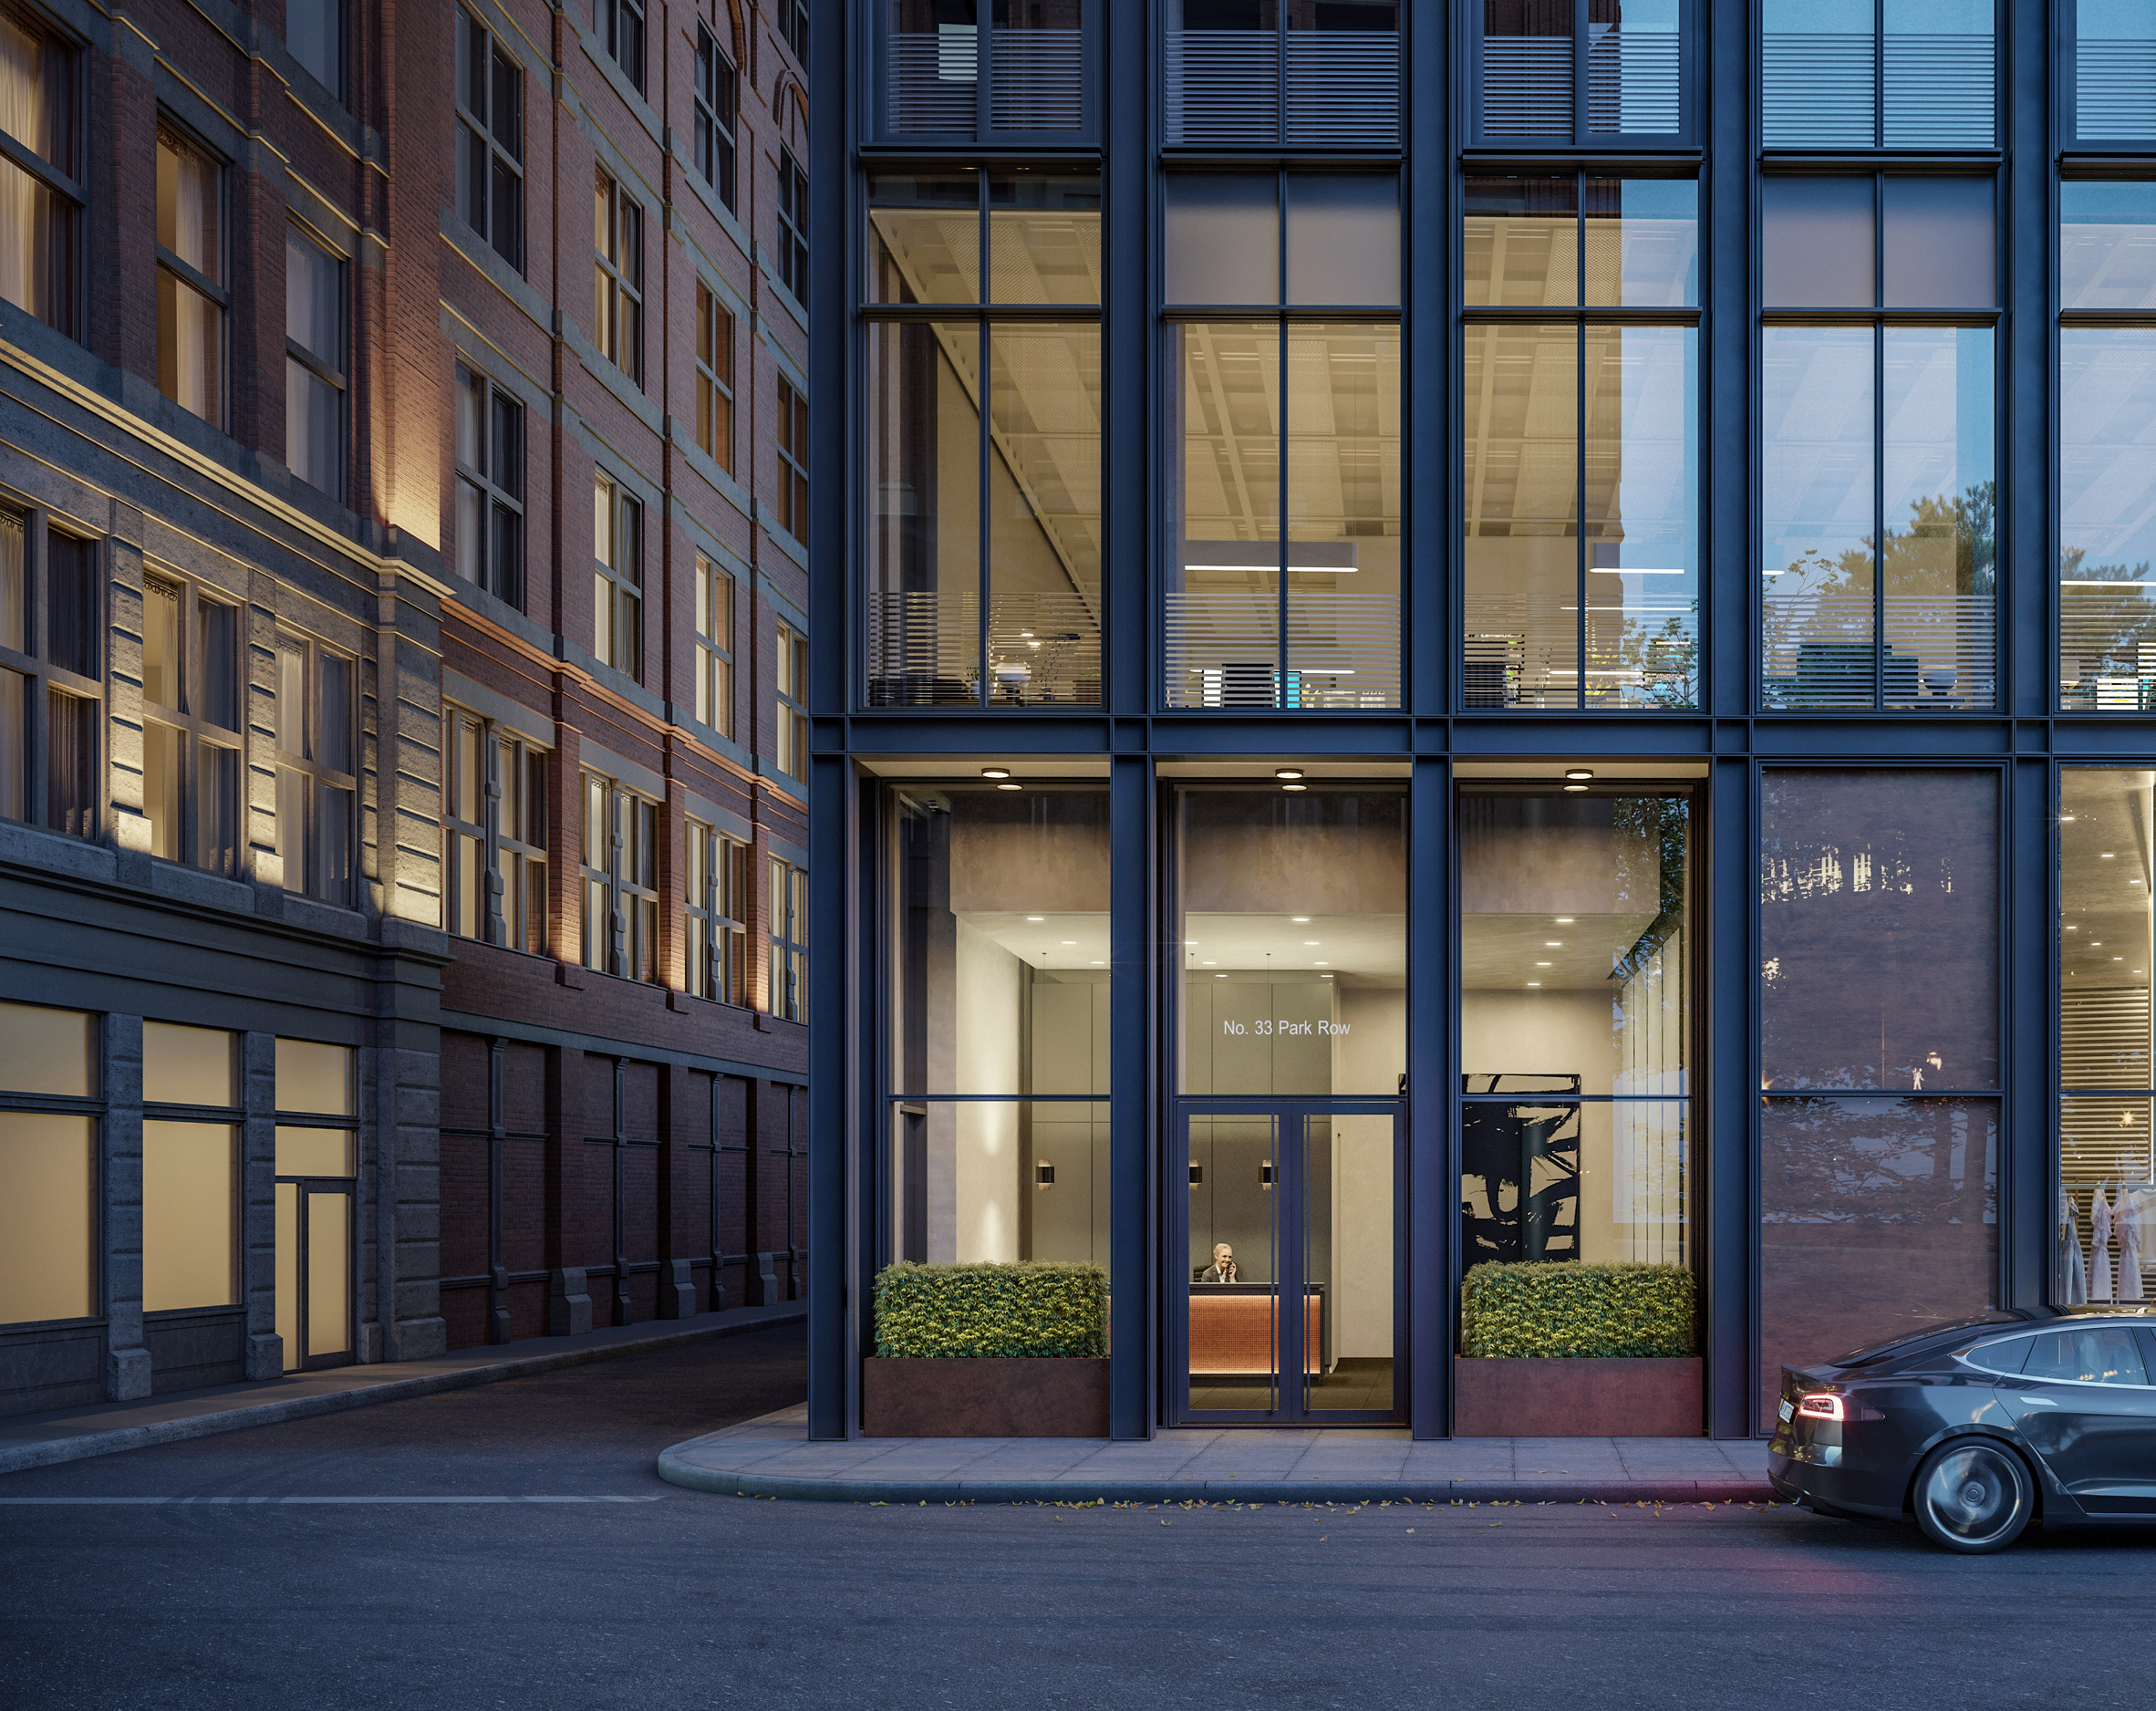 Exterior of No 33 Park Row by Rogers Stirk Harbour + Partners